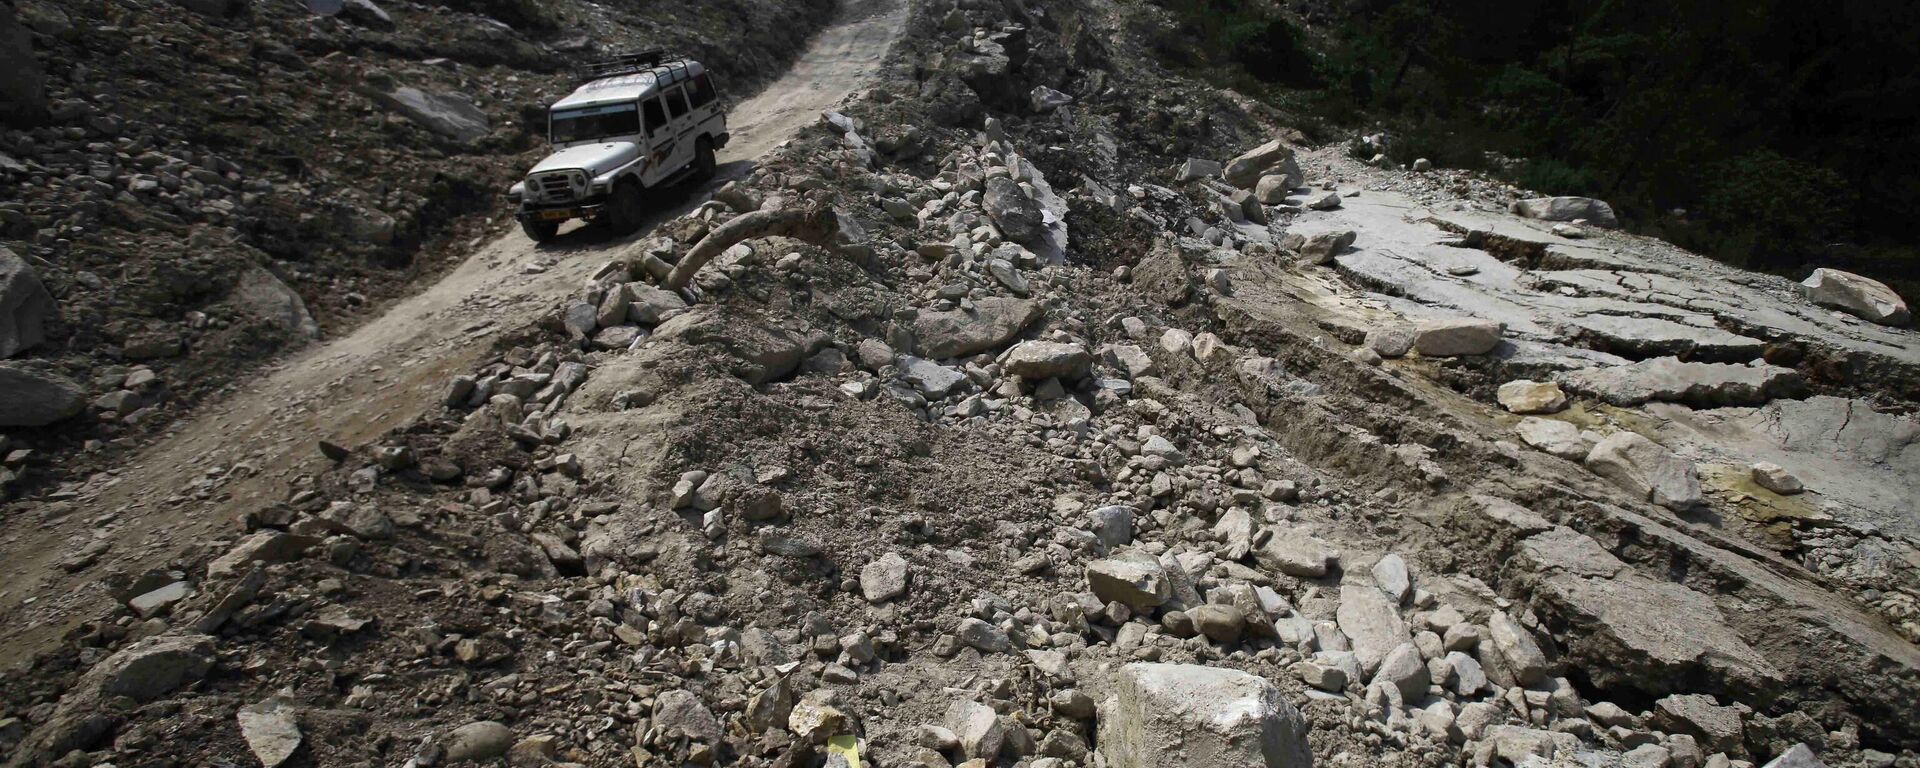  Cars are seen on a road destroyed by landslides and floods,  in Joshimath, India, Friday, June 21, 2013. The heavy rains caused by the annual monsoon have left more than 500 people dead and stranded tens of thousands, mostly pilgrims, in India’s northern mountainous region, officials said Friday.  - Sputnik India, 1920, 05.01.2023